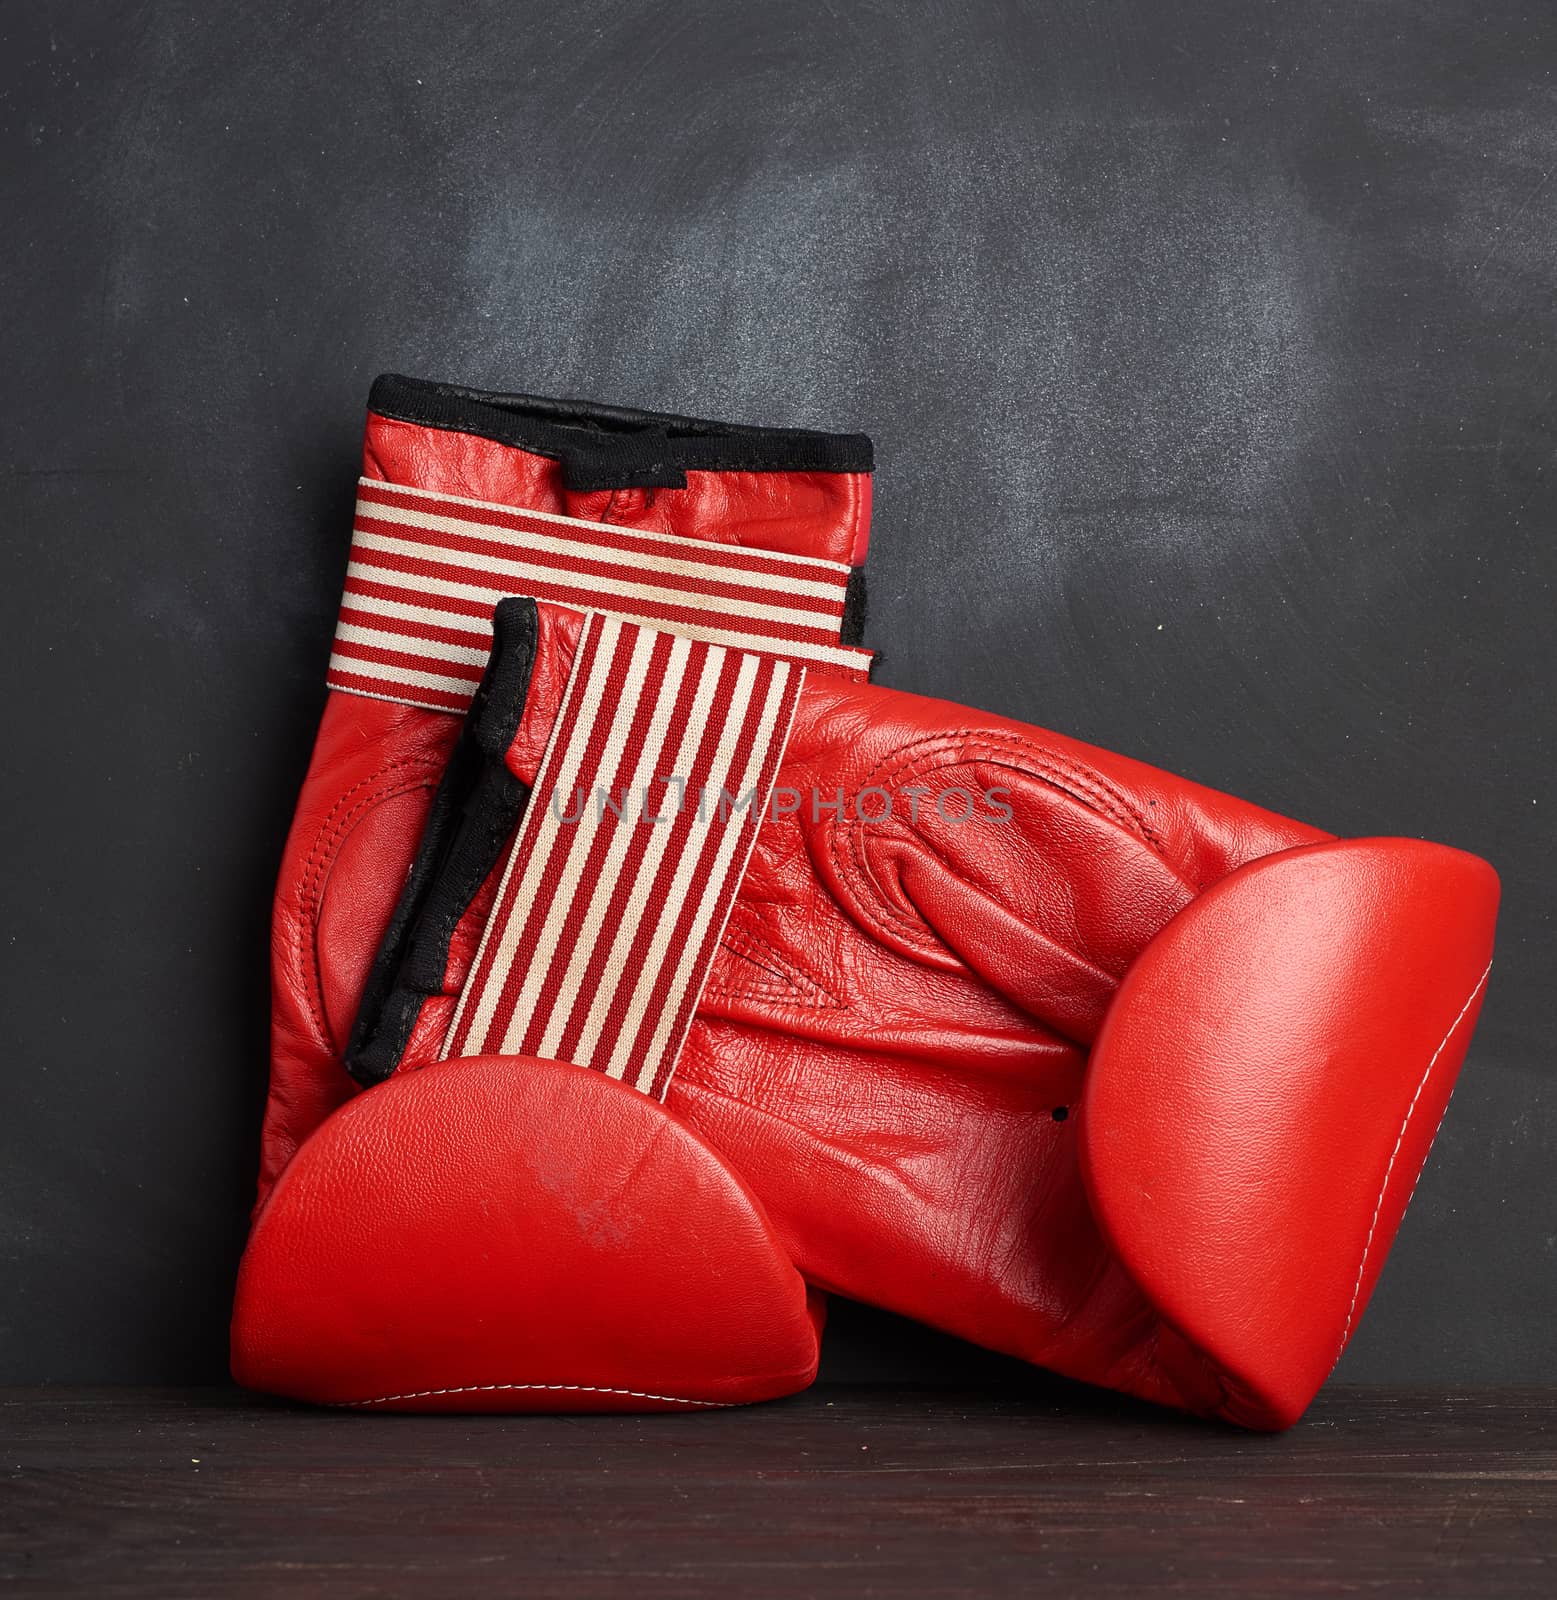 pair of red leather boxing gloves on a black background, sports equipment, close up